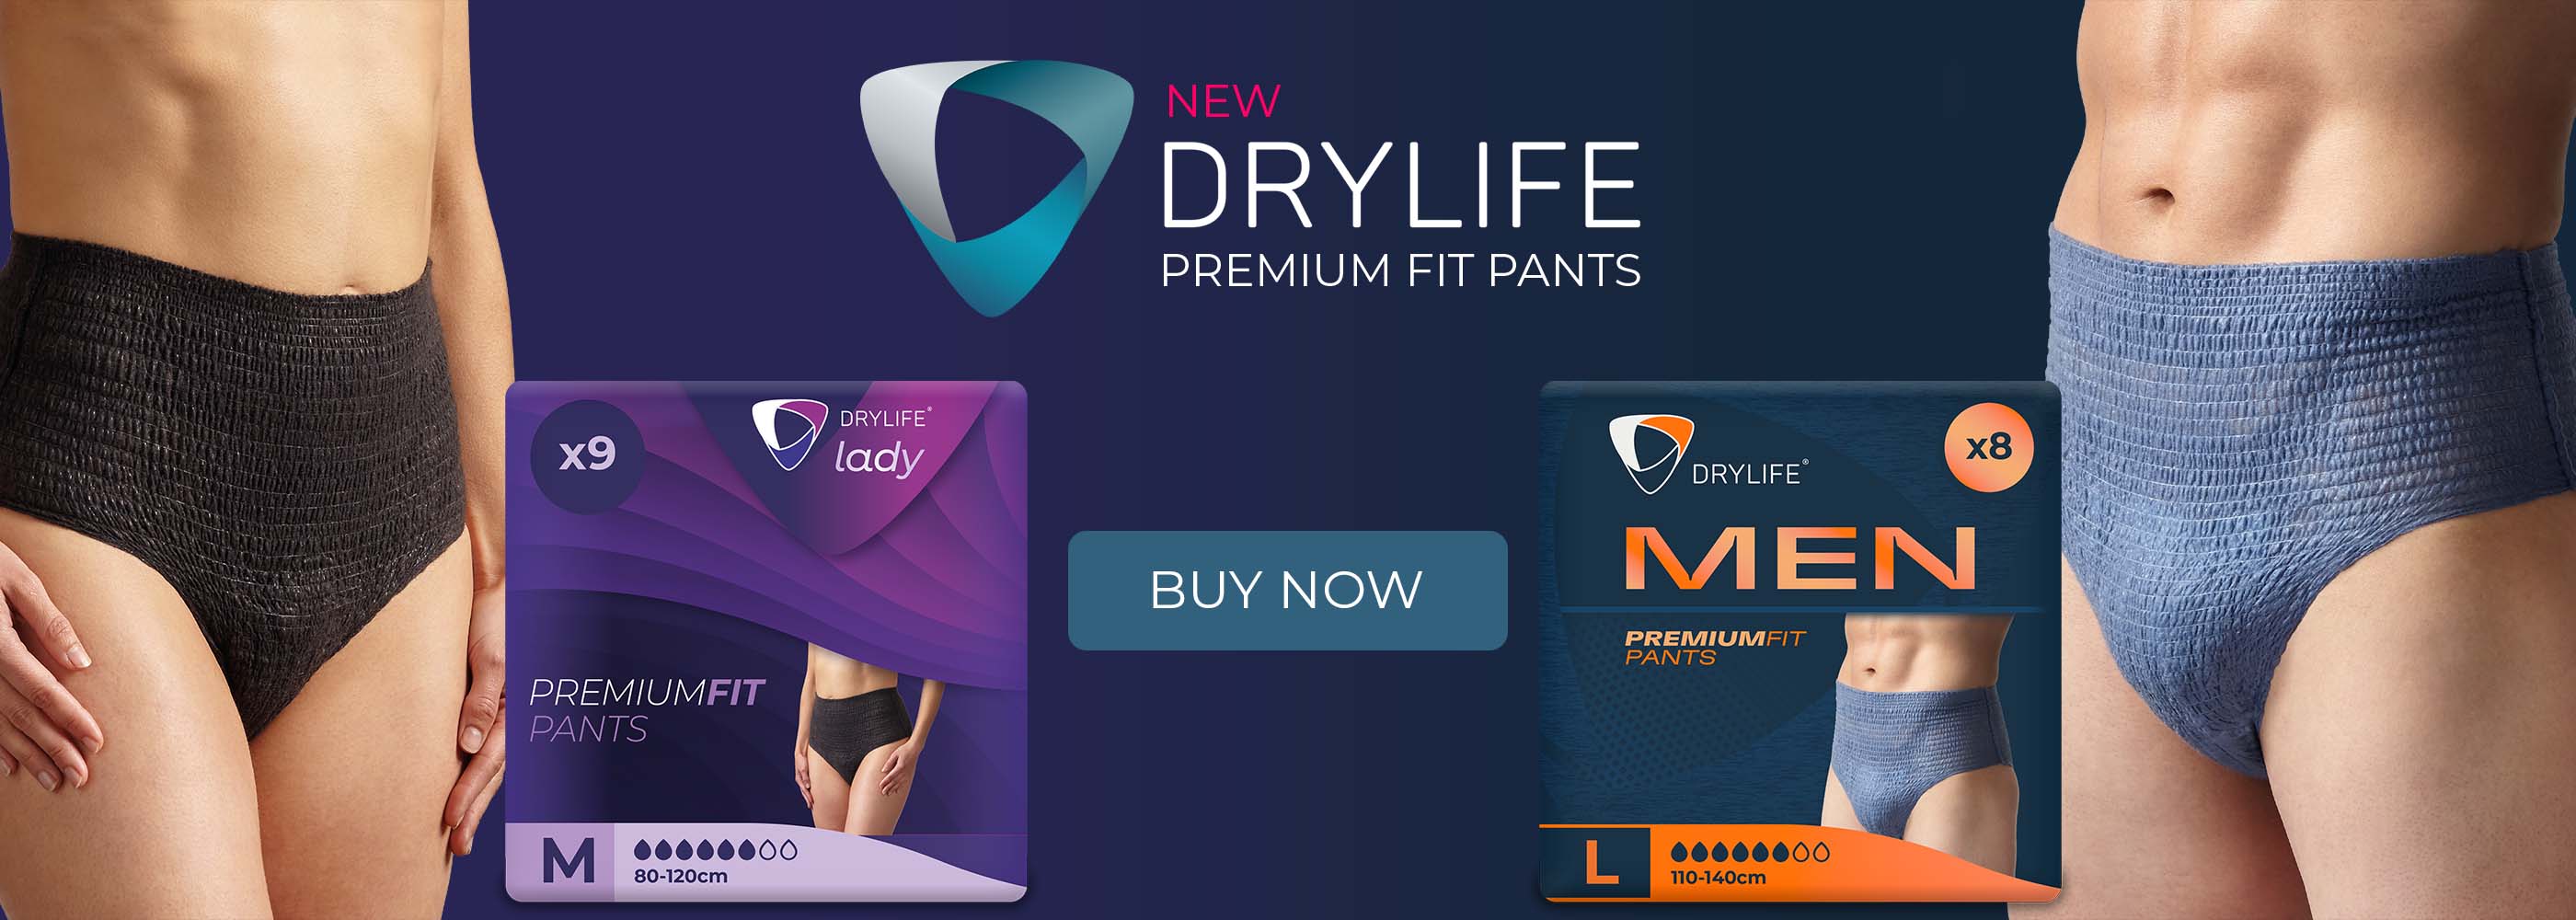 Drylife Premium Fit Pants Now Available!